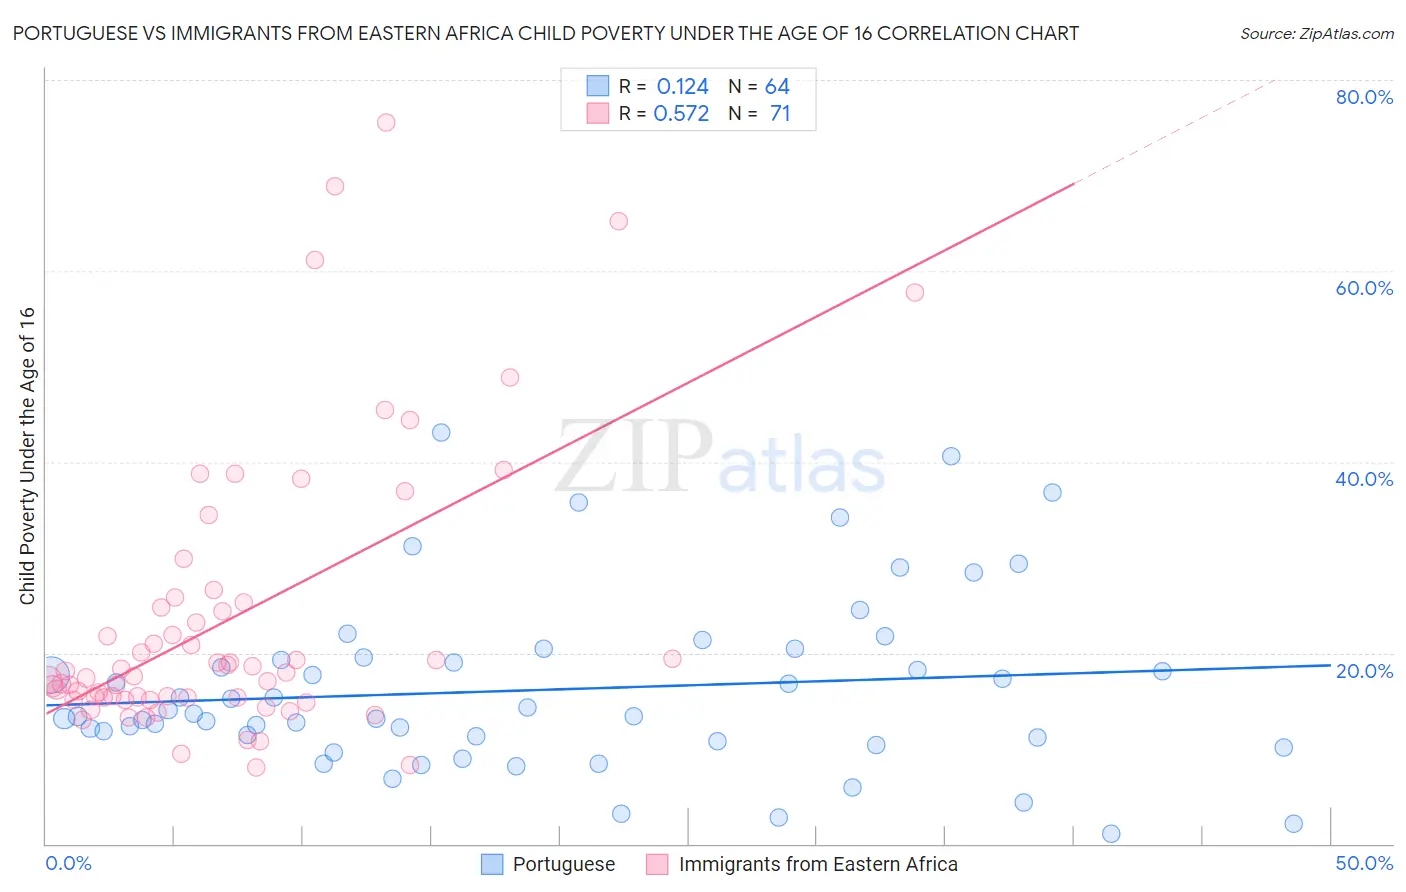 Portuguese vs Immigrants from Eastern Africa Child Poverty Under the Age of 16